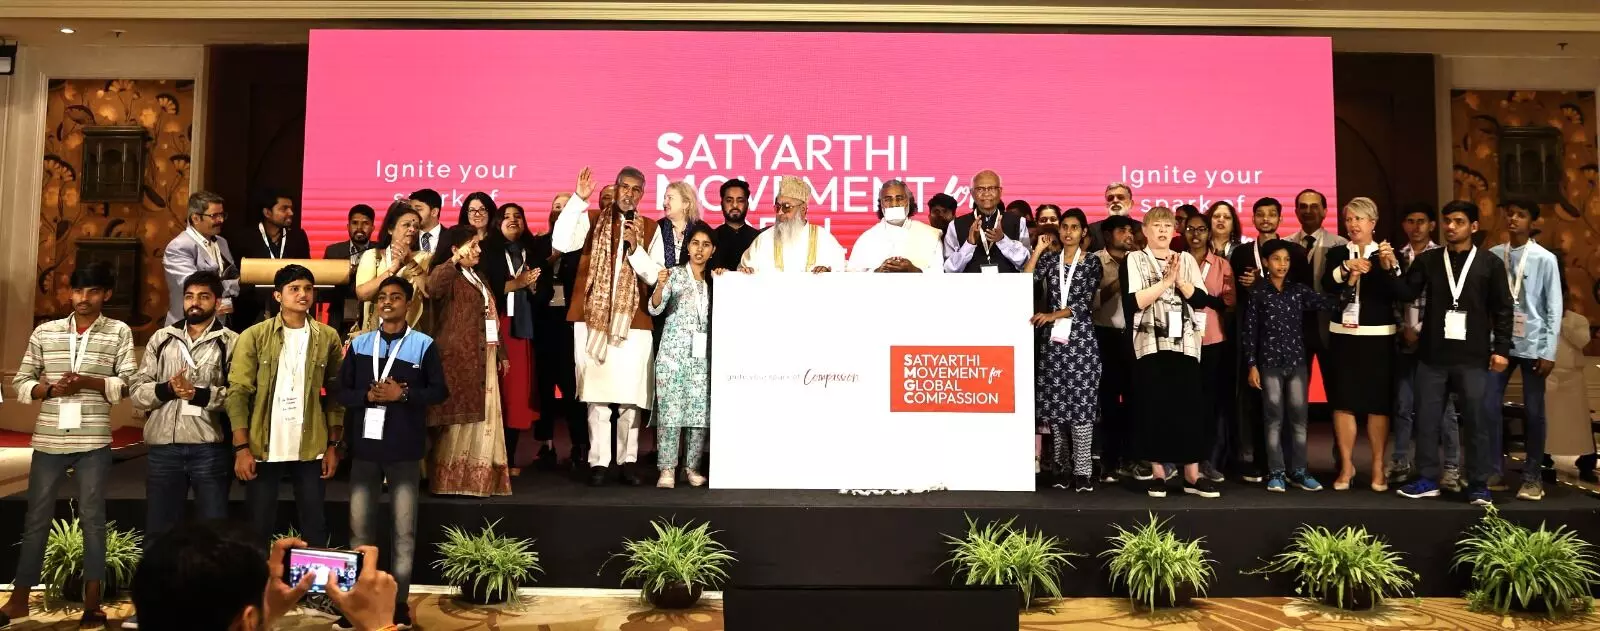 Kailash Satyarthi Launches New Movement to Unite the World with Compassion